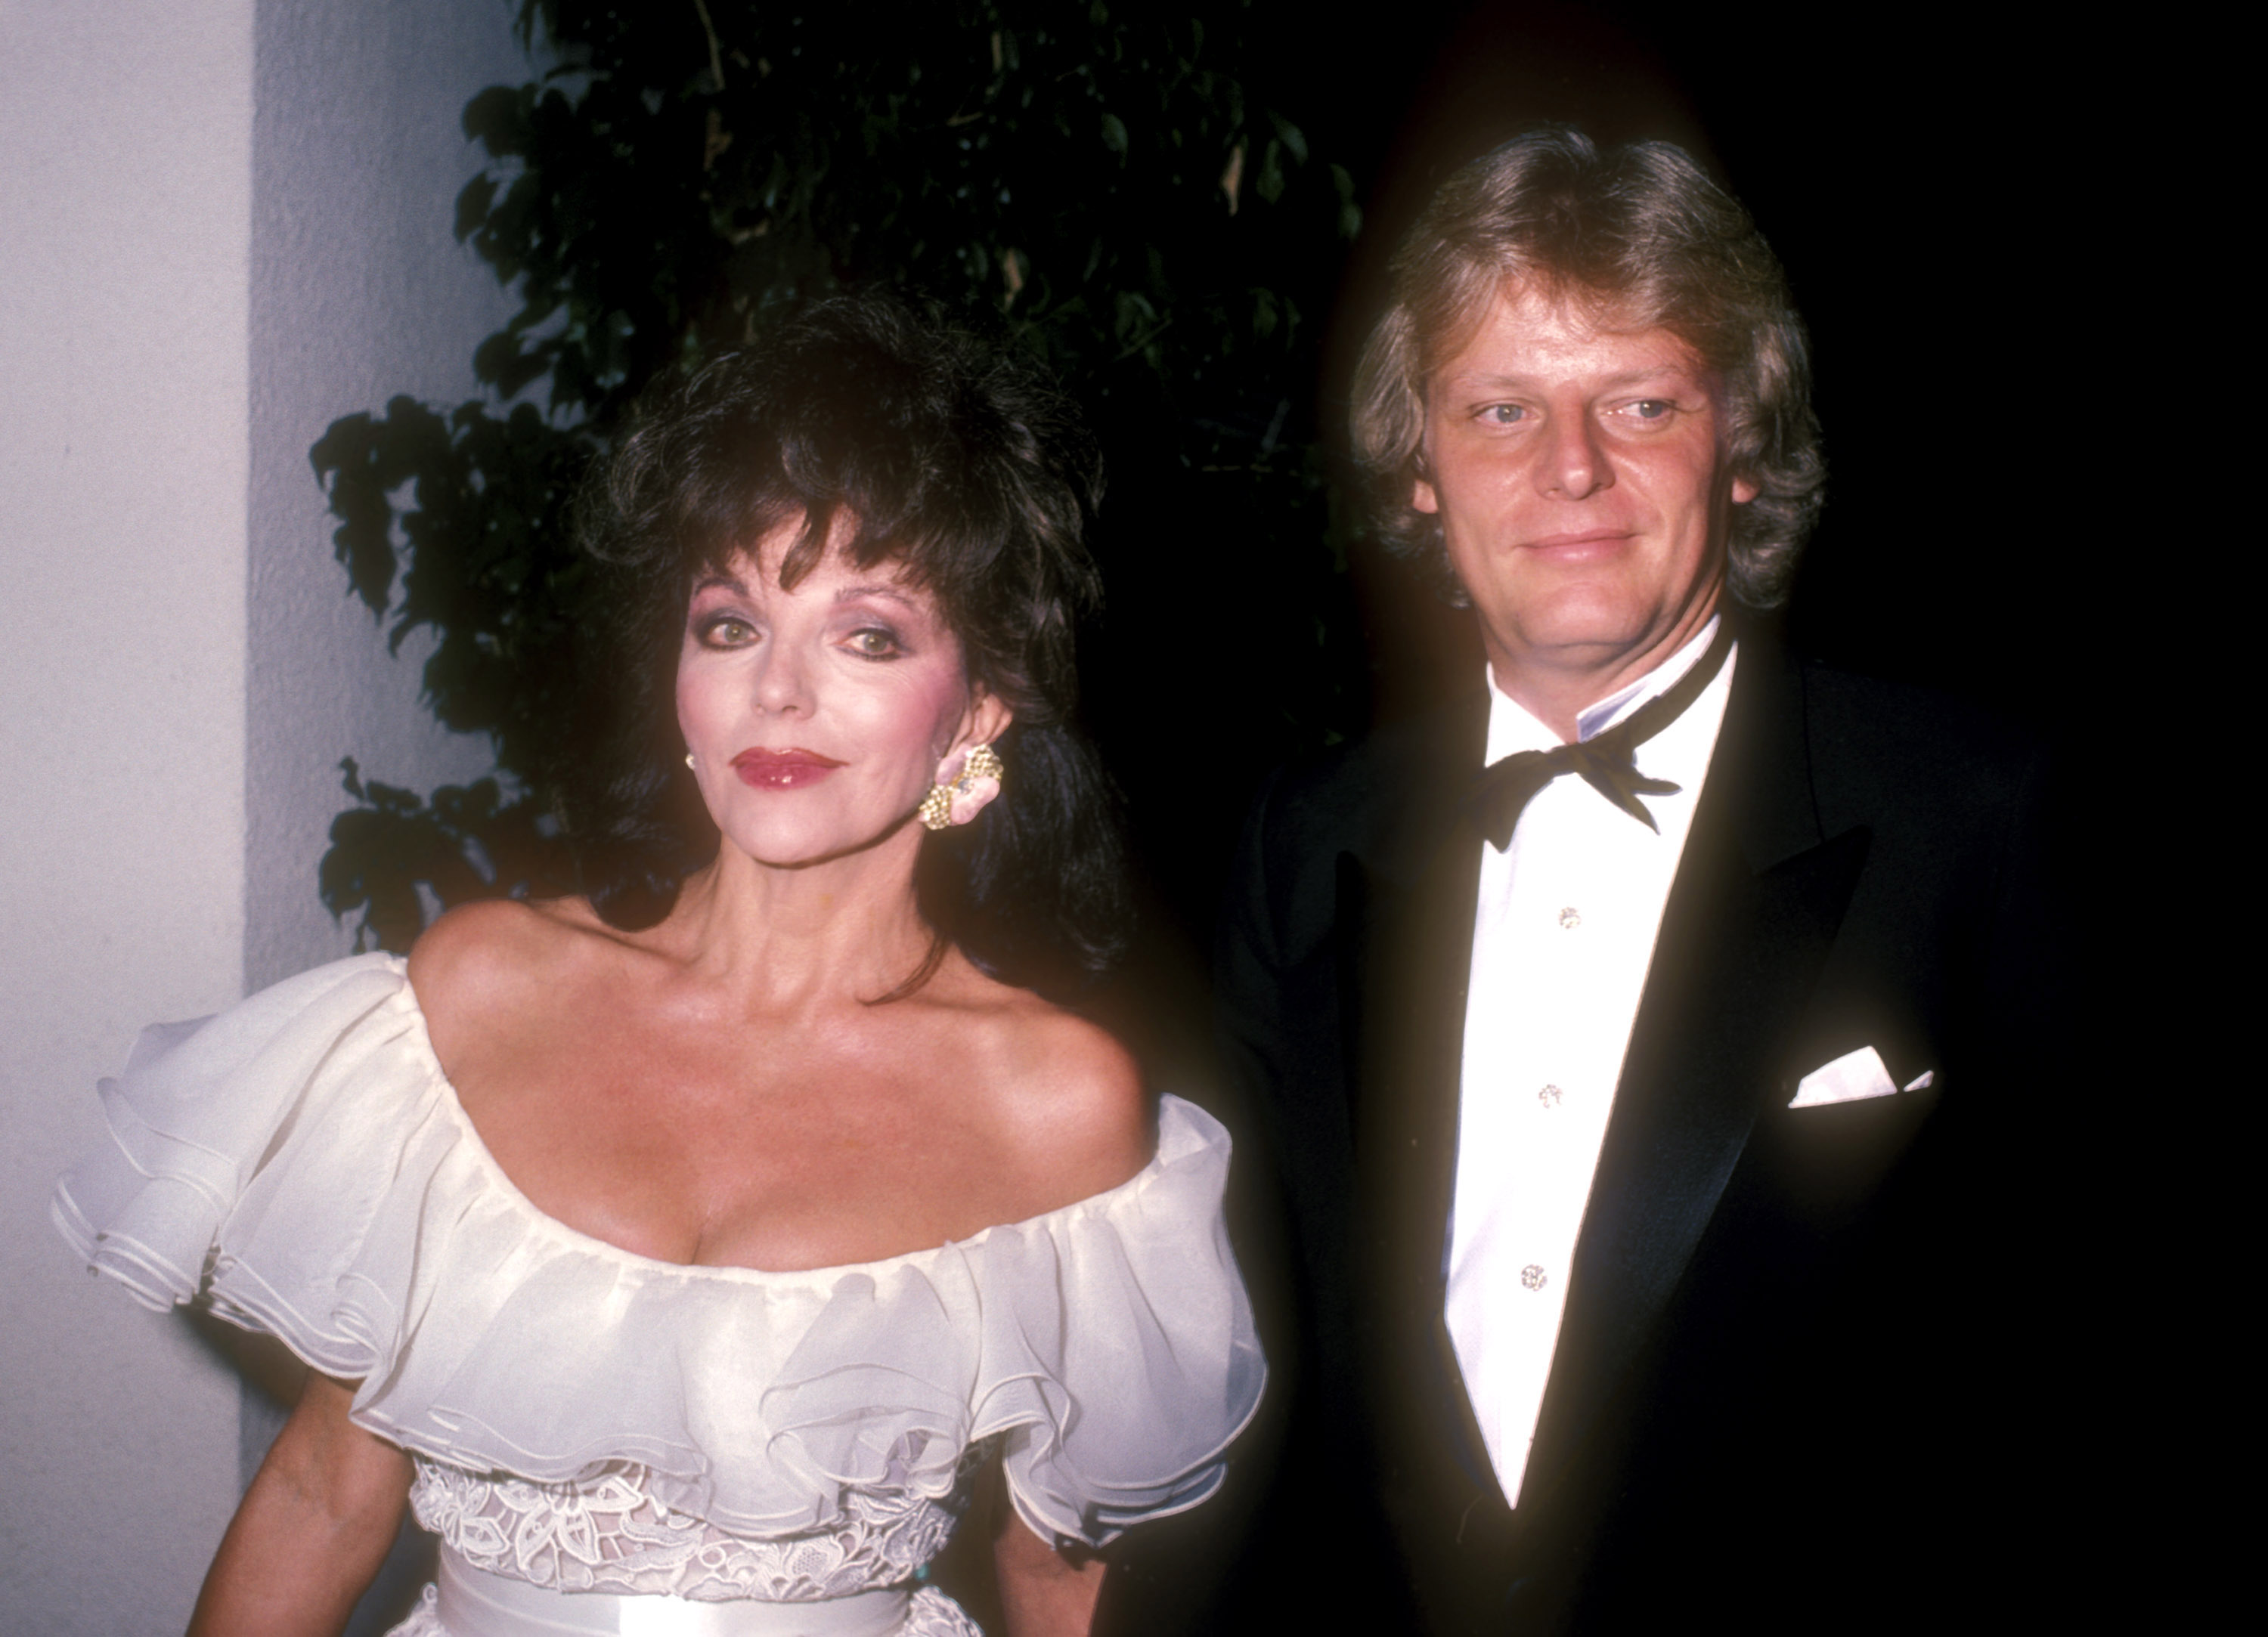 Joan Collins and Peter Holm (The Swede) during Nolan Miller Party on August 24, 1985 in California | Source: Getty Images